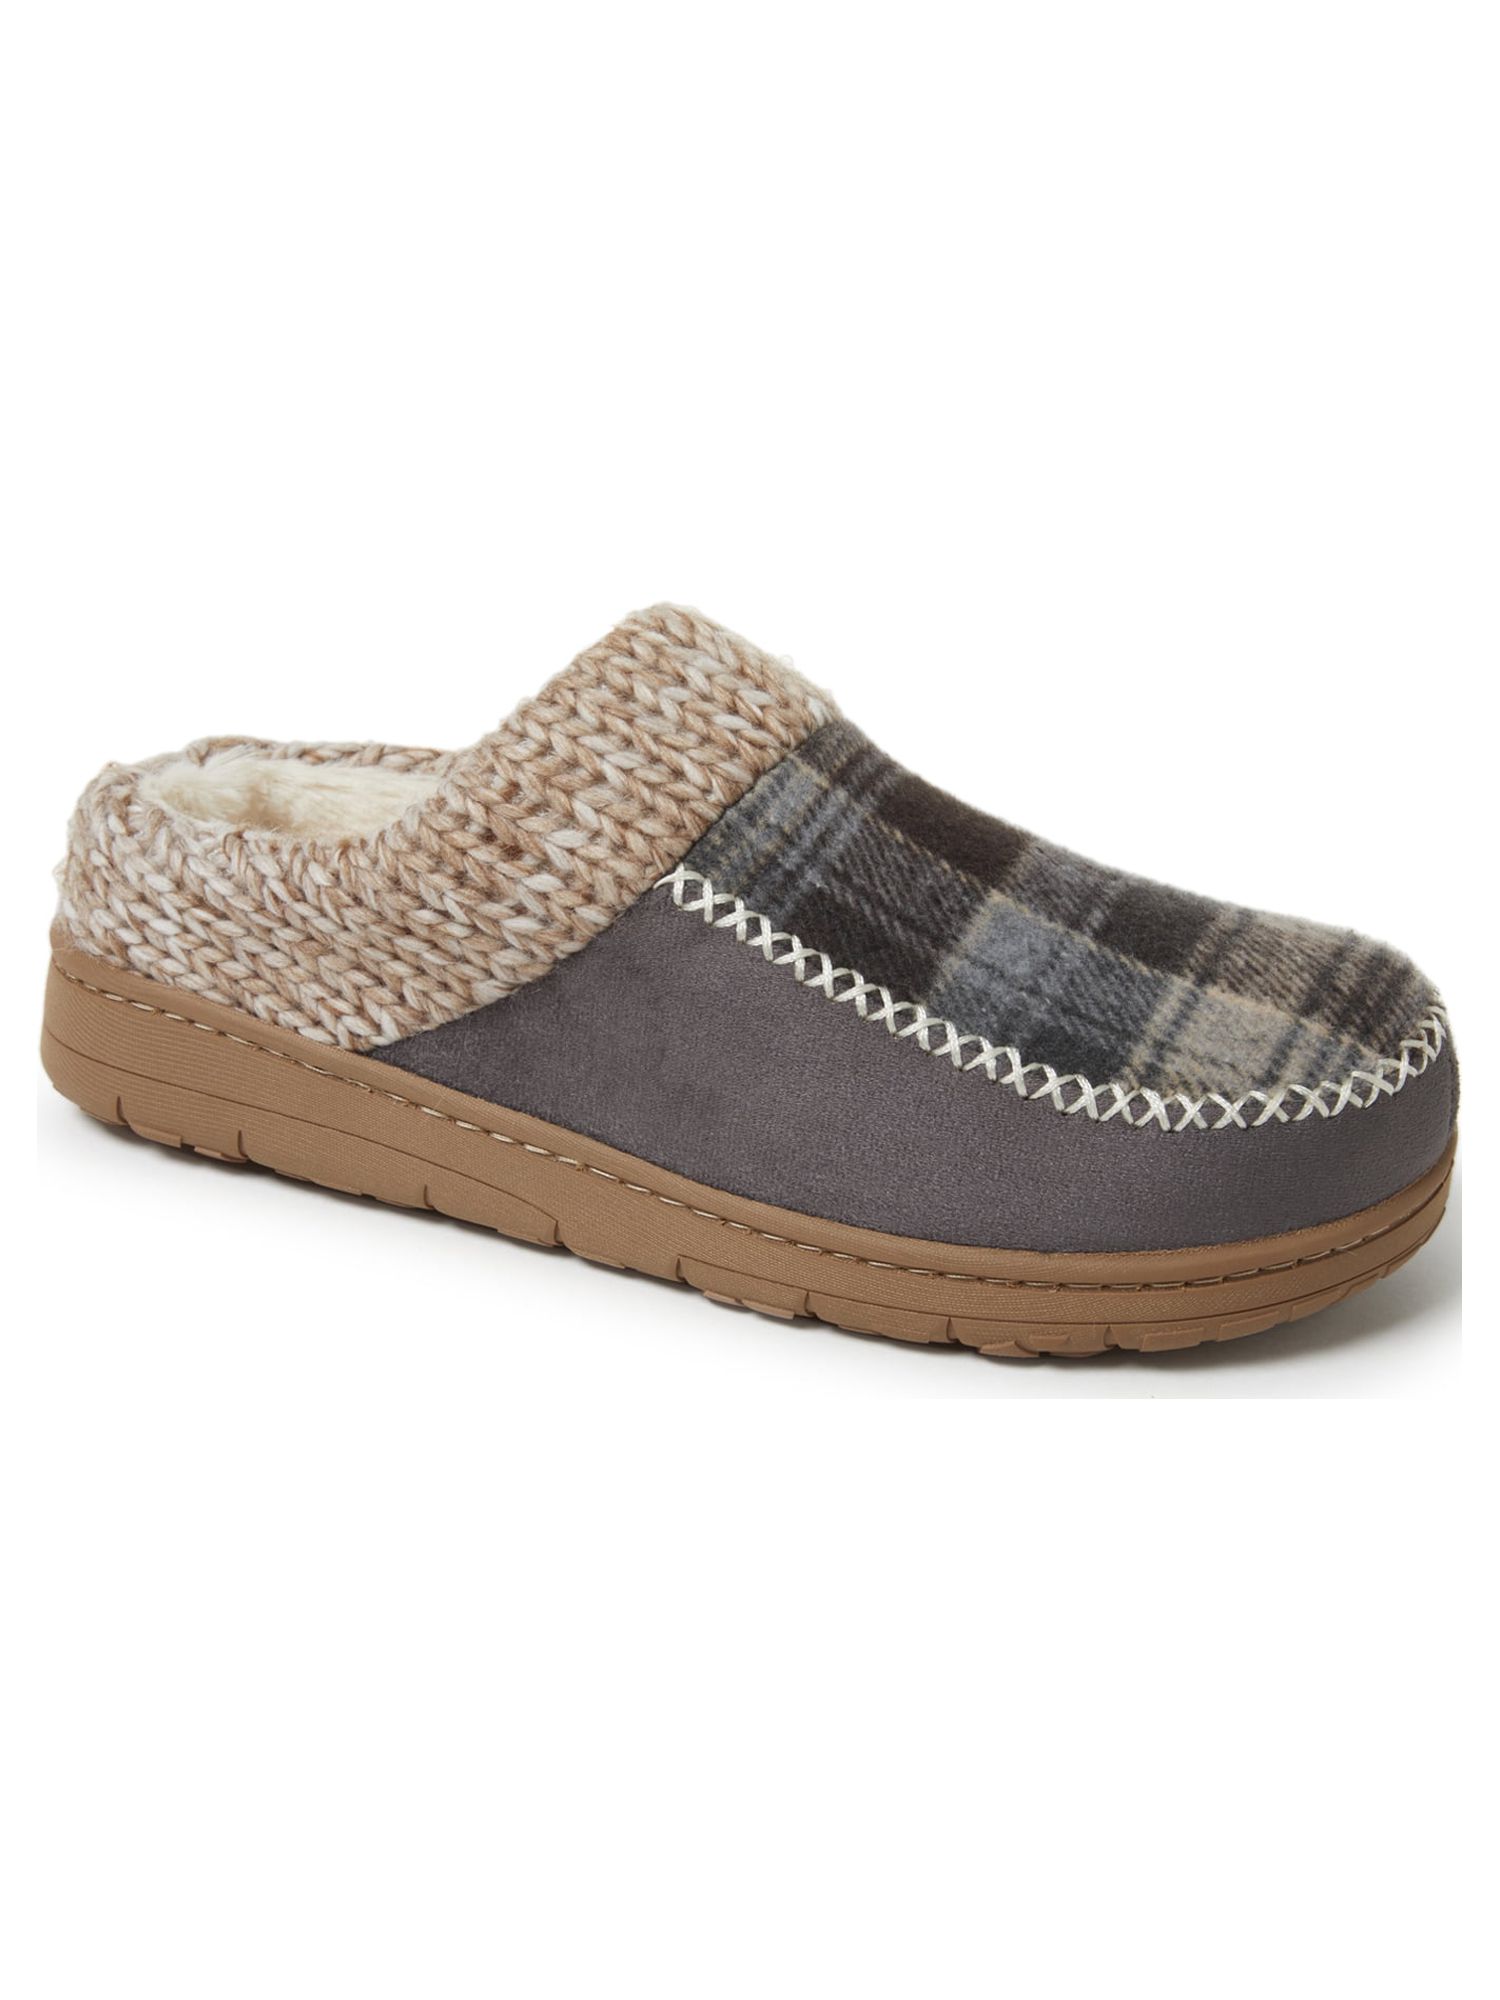 Dearfoams Cozy Comfort Women's Moc Toe Clog Slippers with Chunky Knit Collar - image 3 of 7